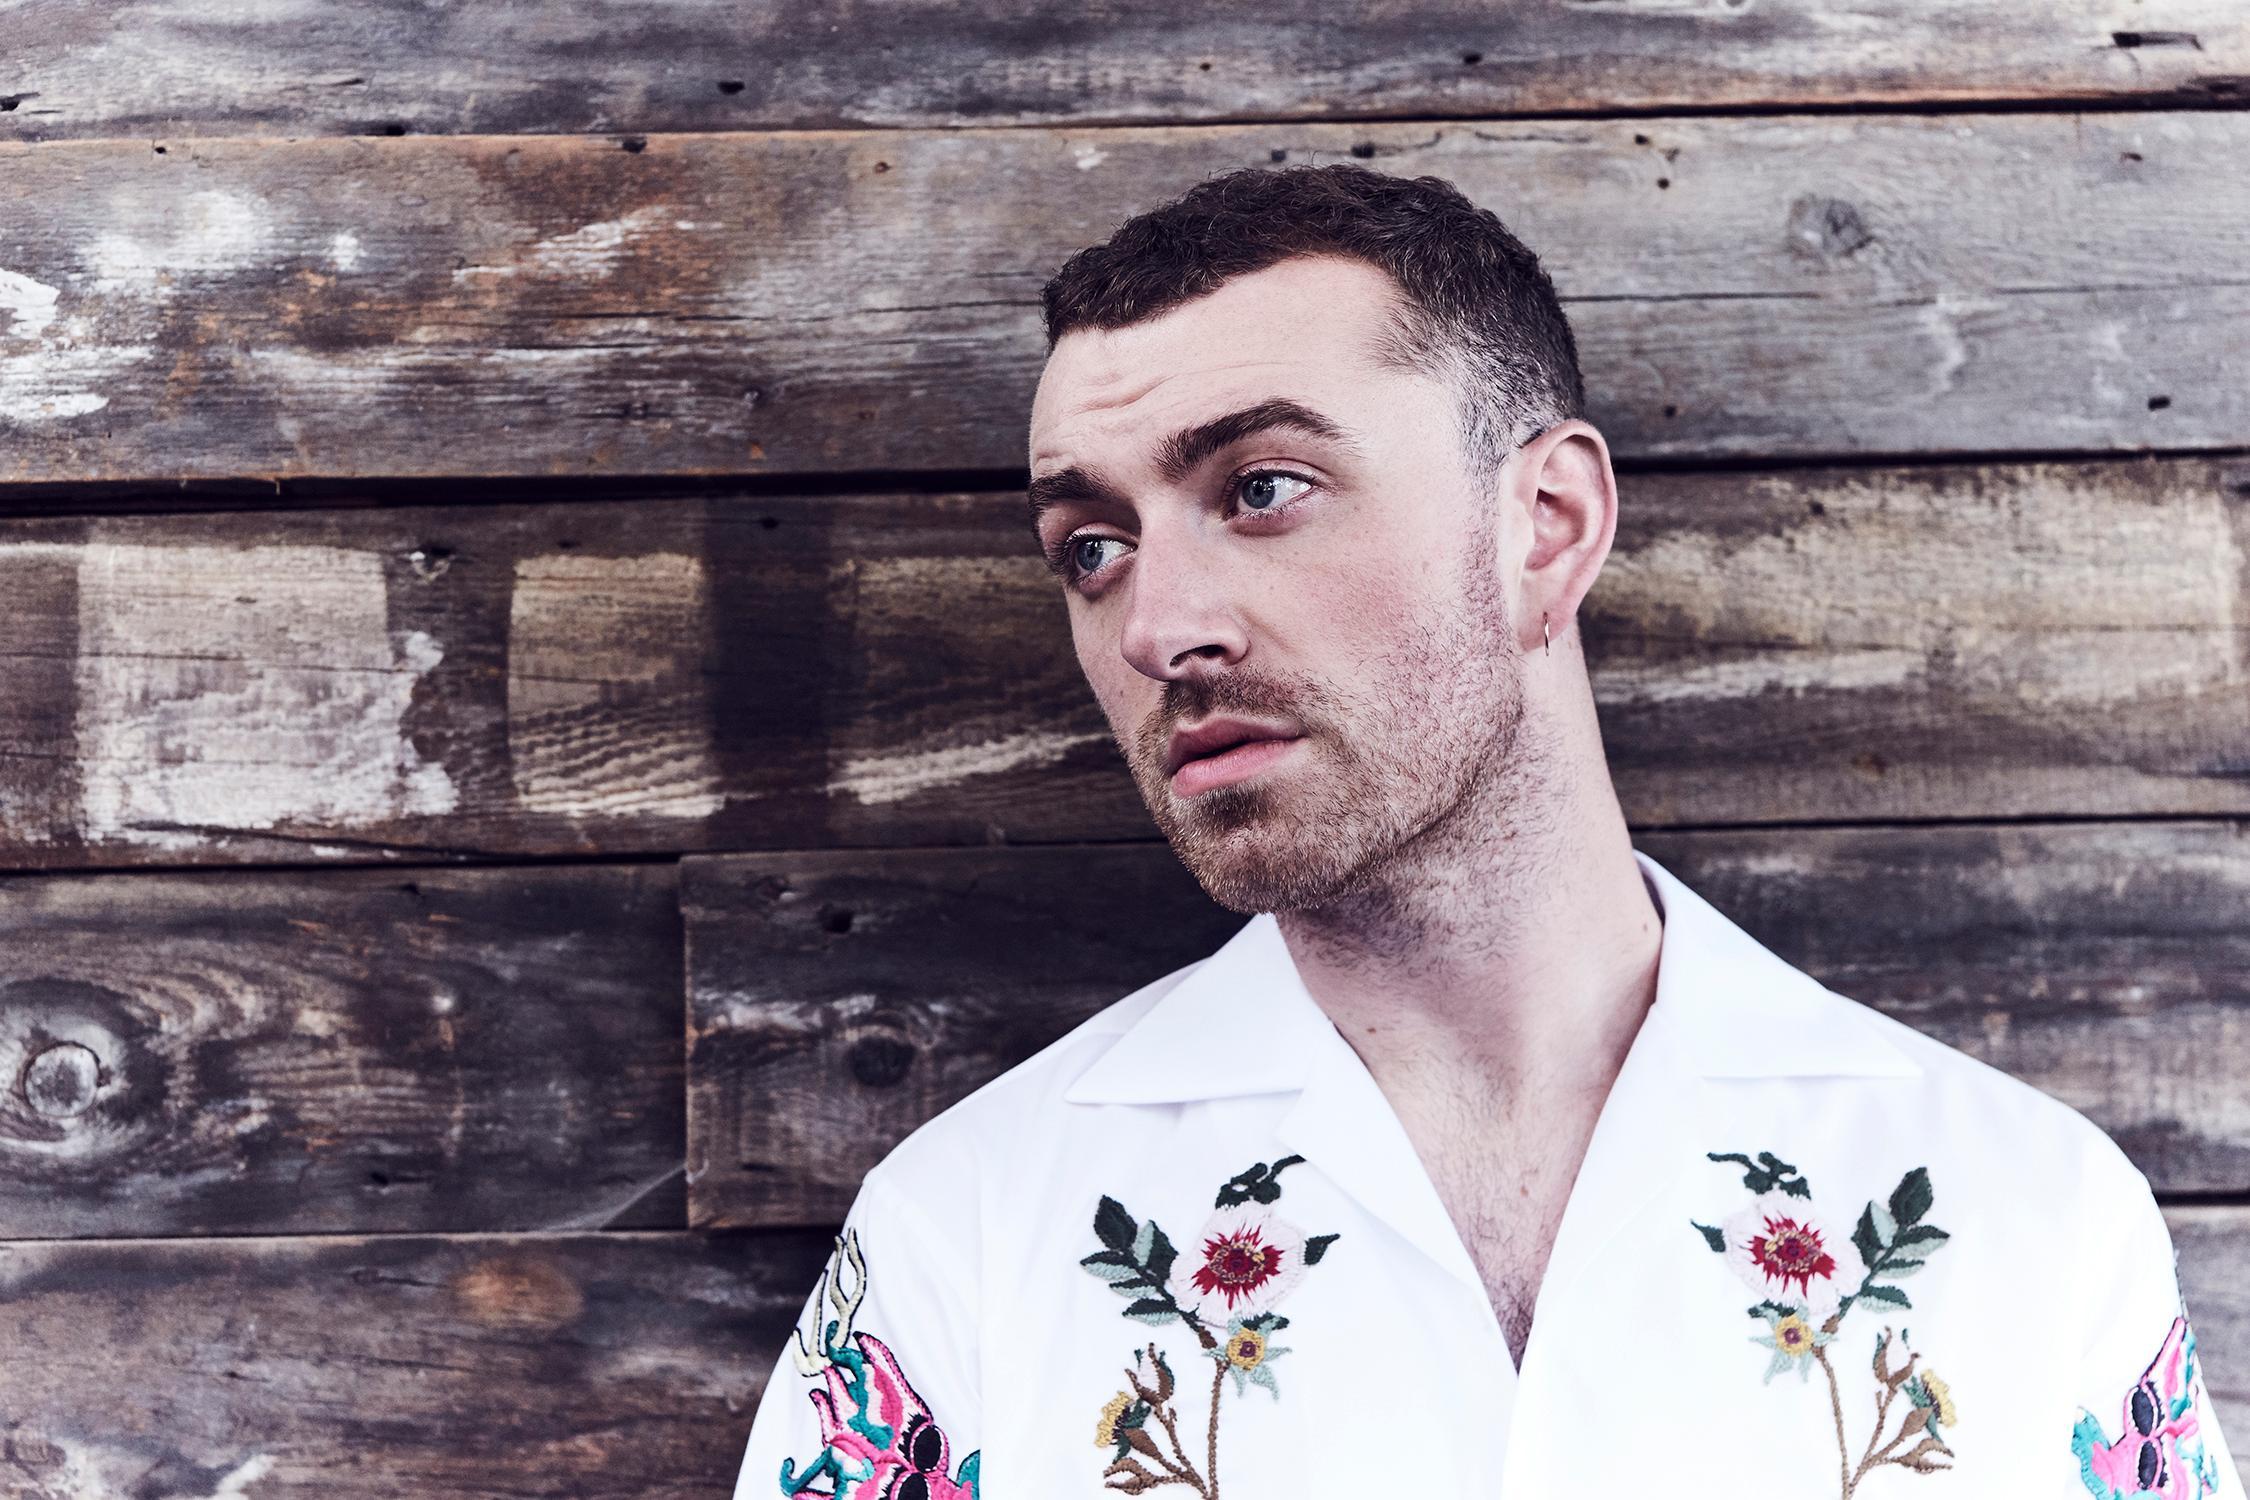 Extra shows in Sydney, Melbourne, as demand rises for Sam Smith